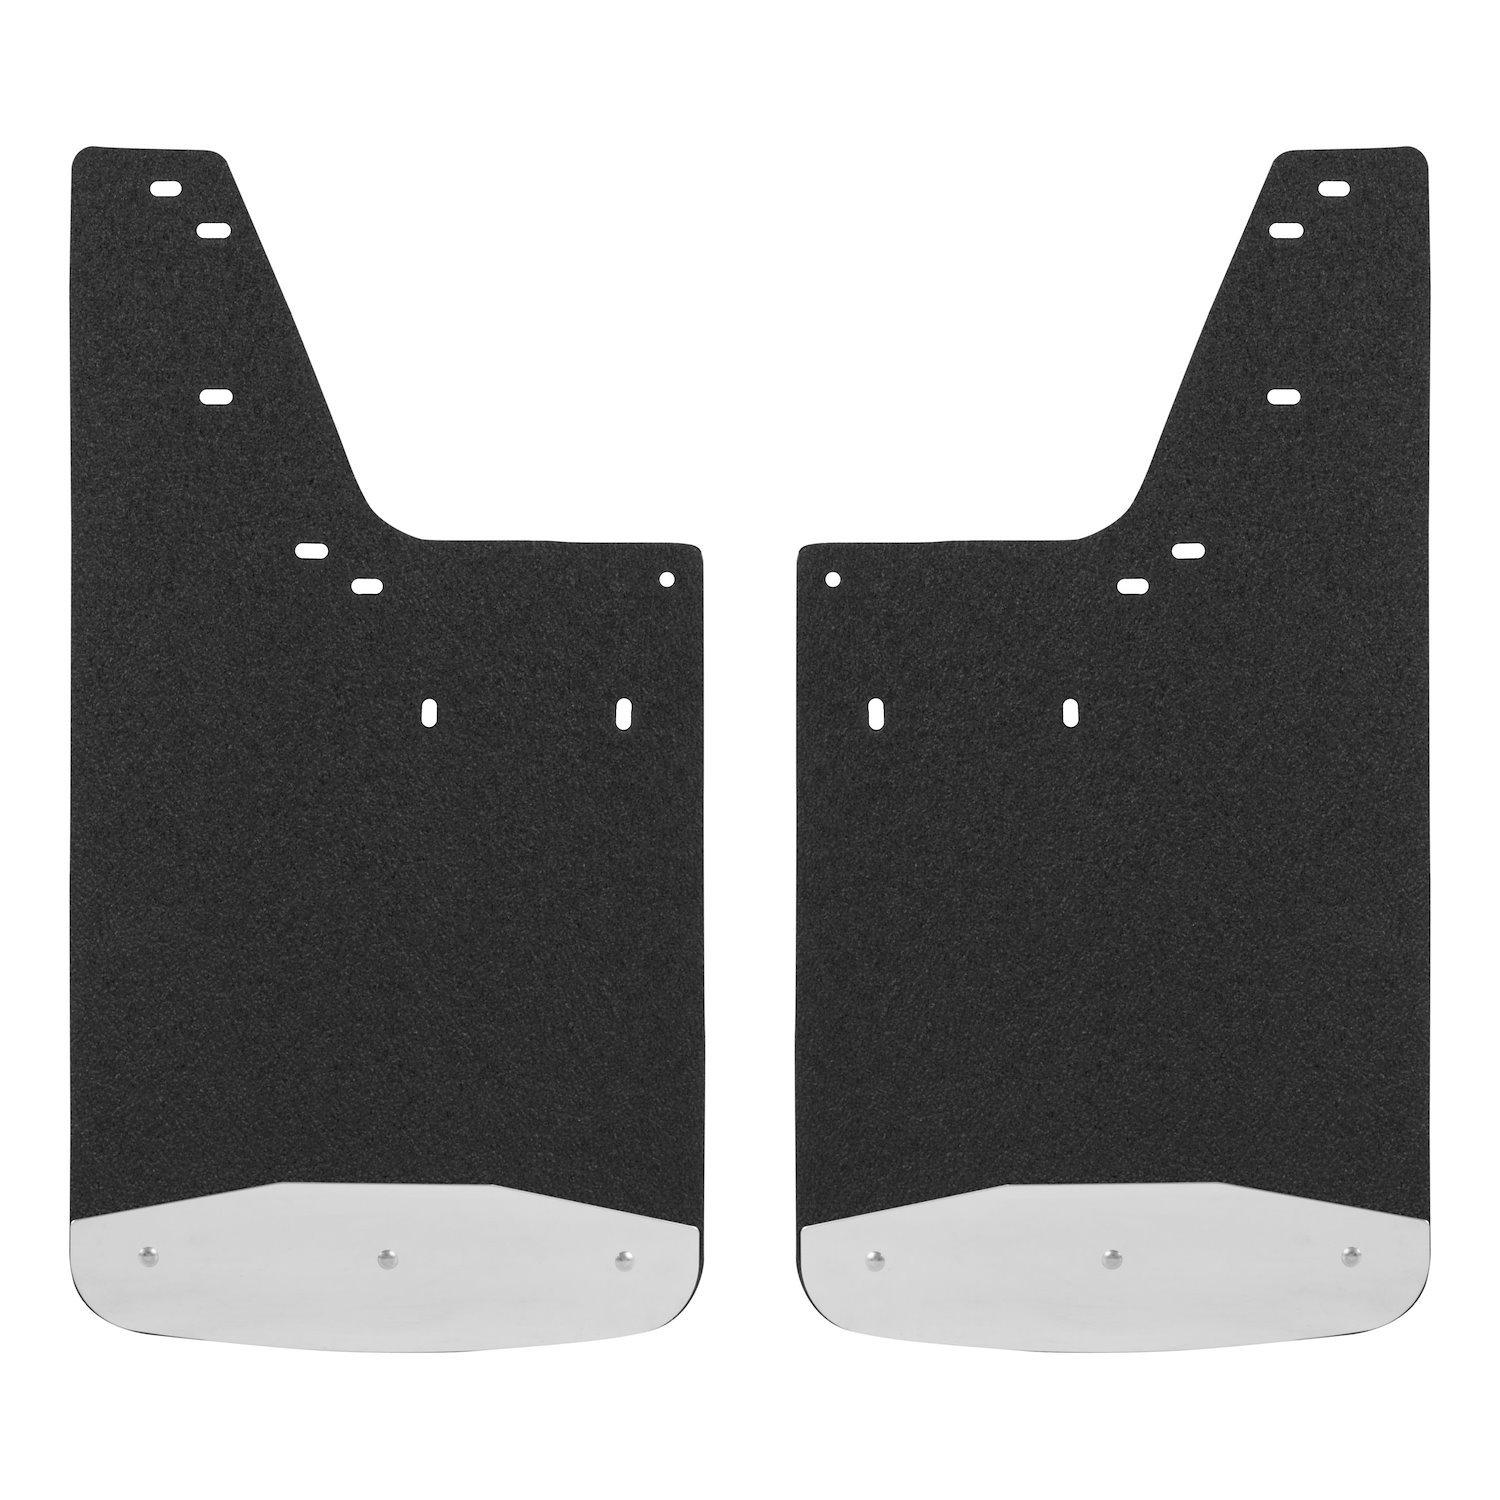 250233 Front or Rear 12 in. x 23 in. Textured Rubber Mud Guards Fits Select Dodge Ram